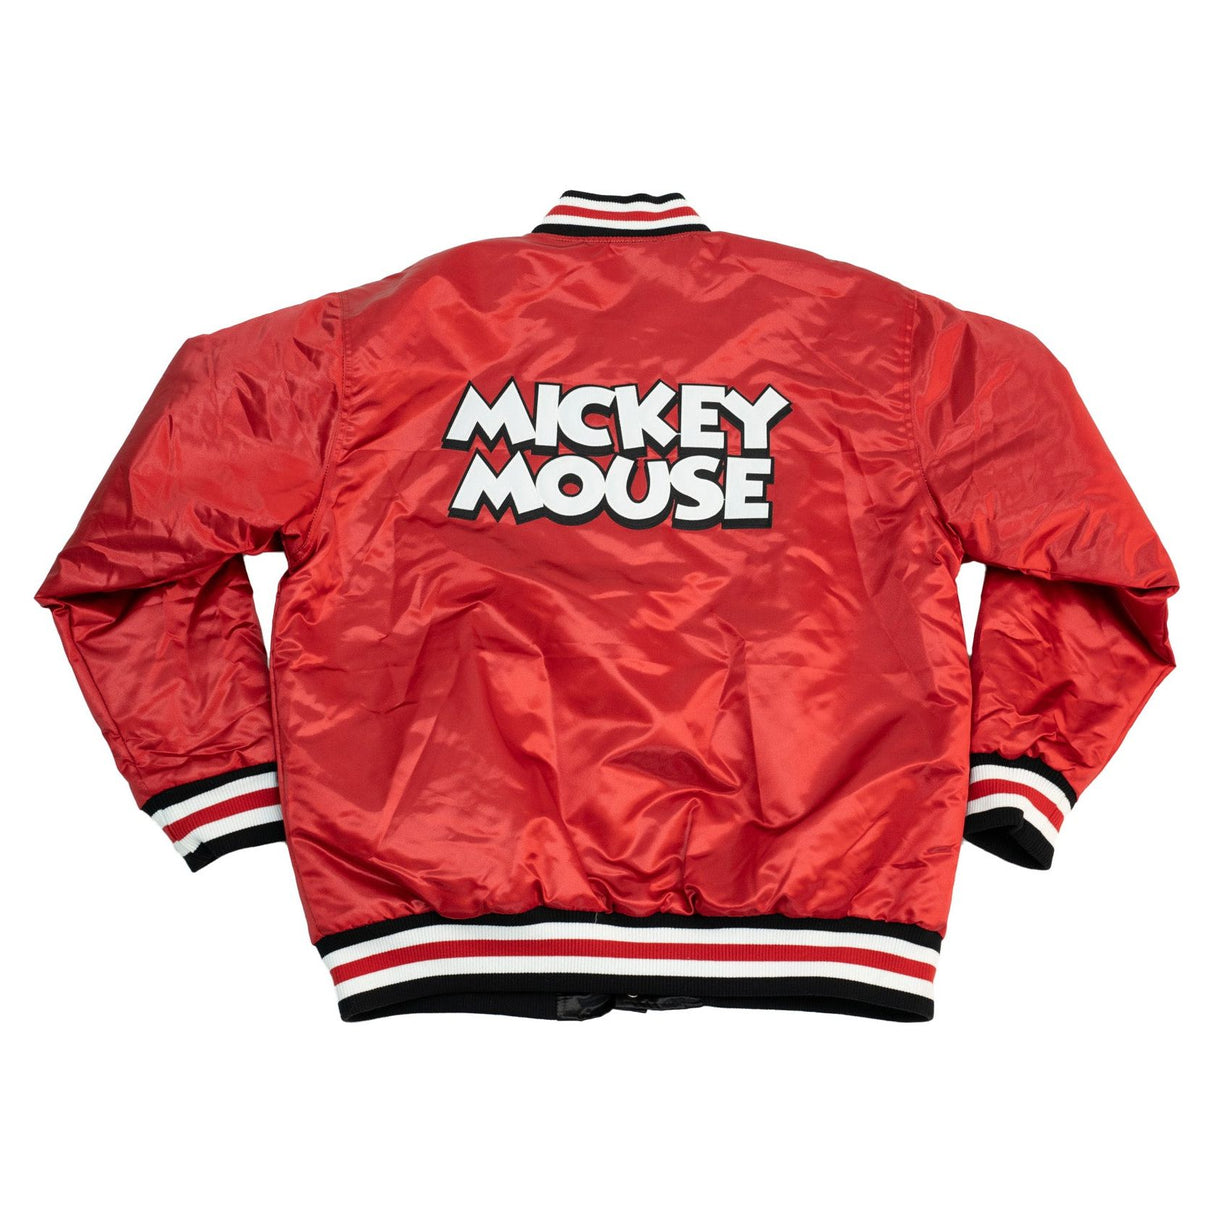 YOUTH MICKEY MOUSE SATIN JACKET RED